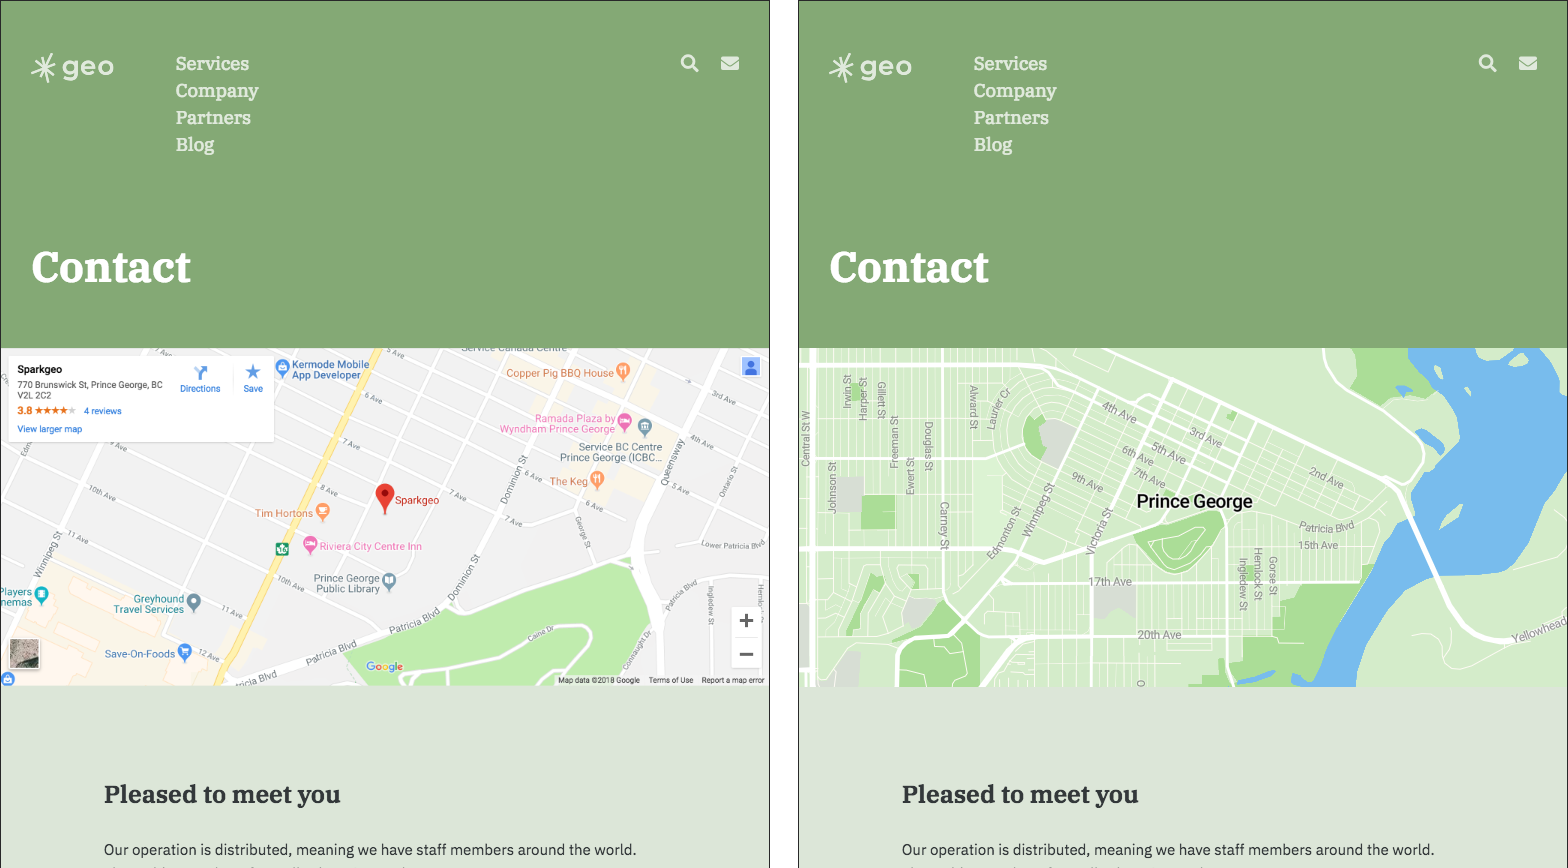 Screenshots of the contact page before and after the updated map.